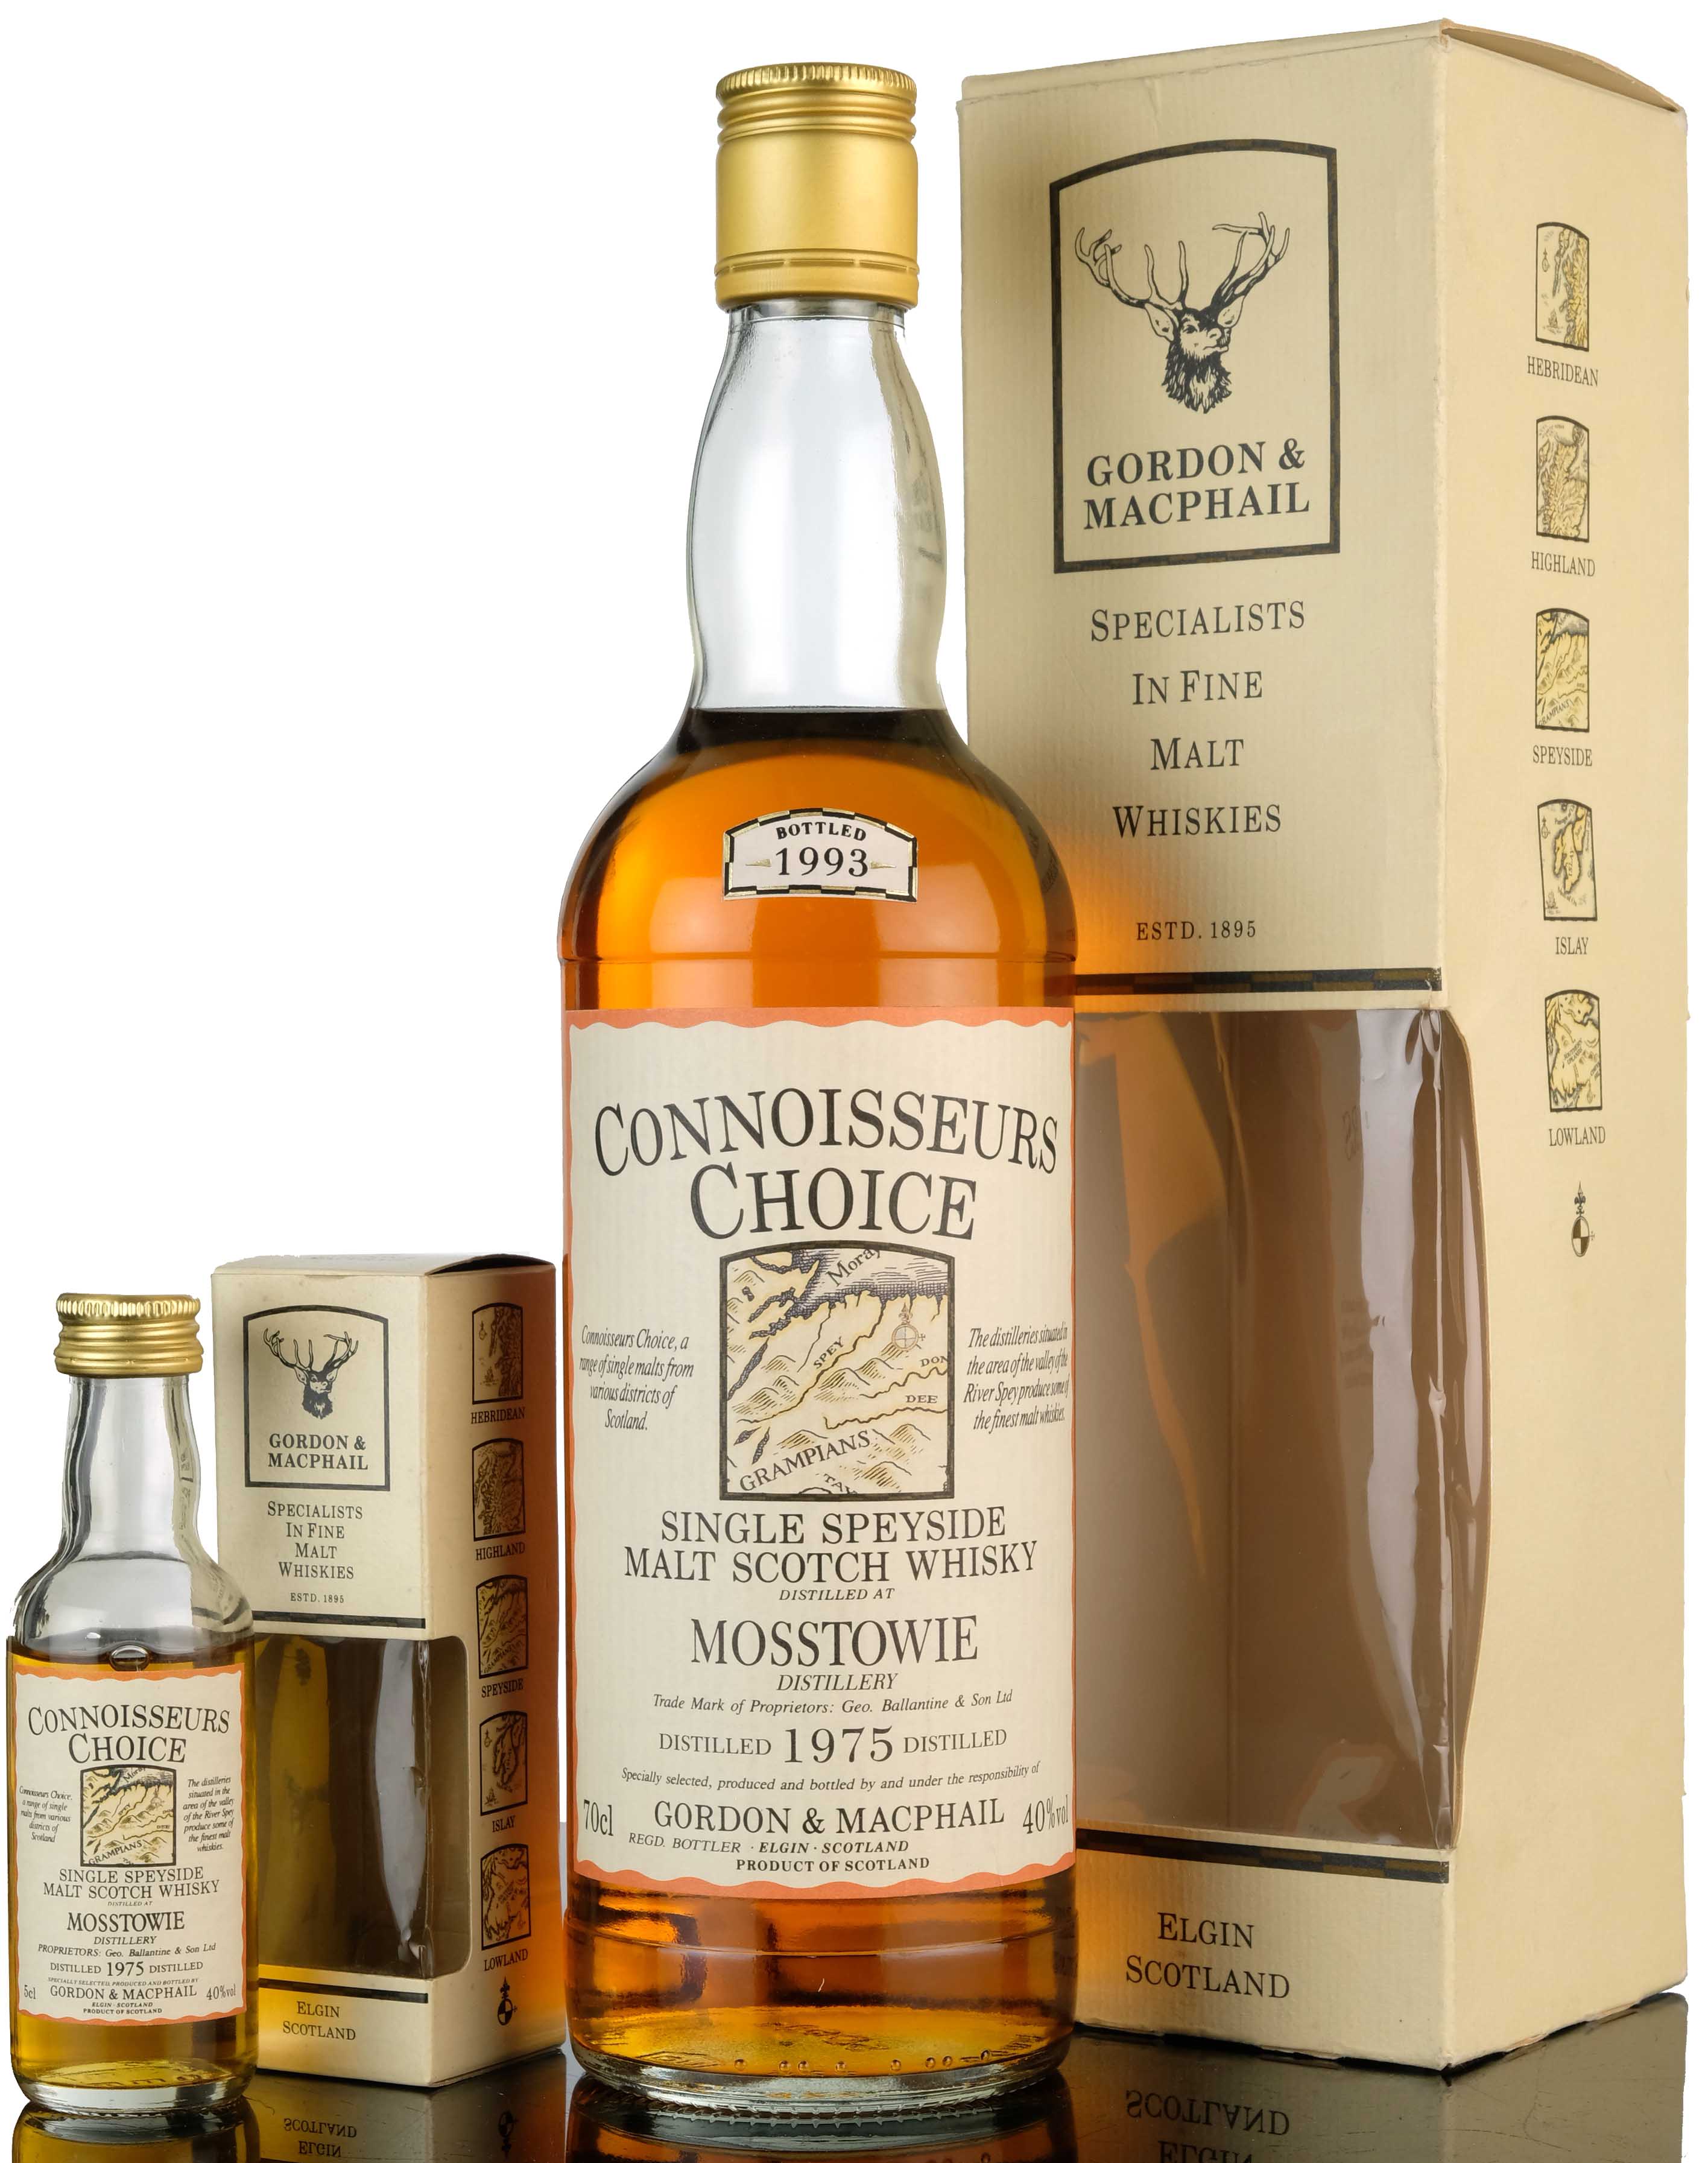 Mosstowie 1975-1993 - Connoisseurs Choice - With Miniature